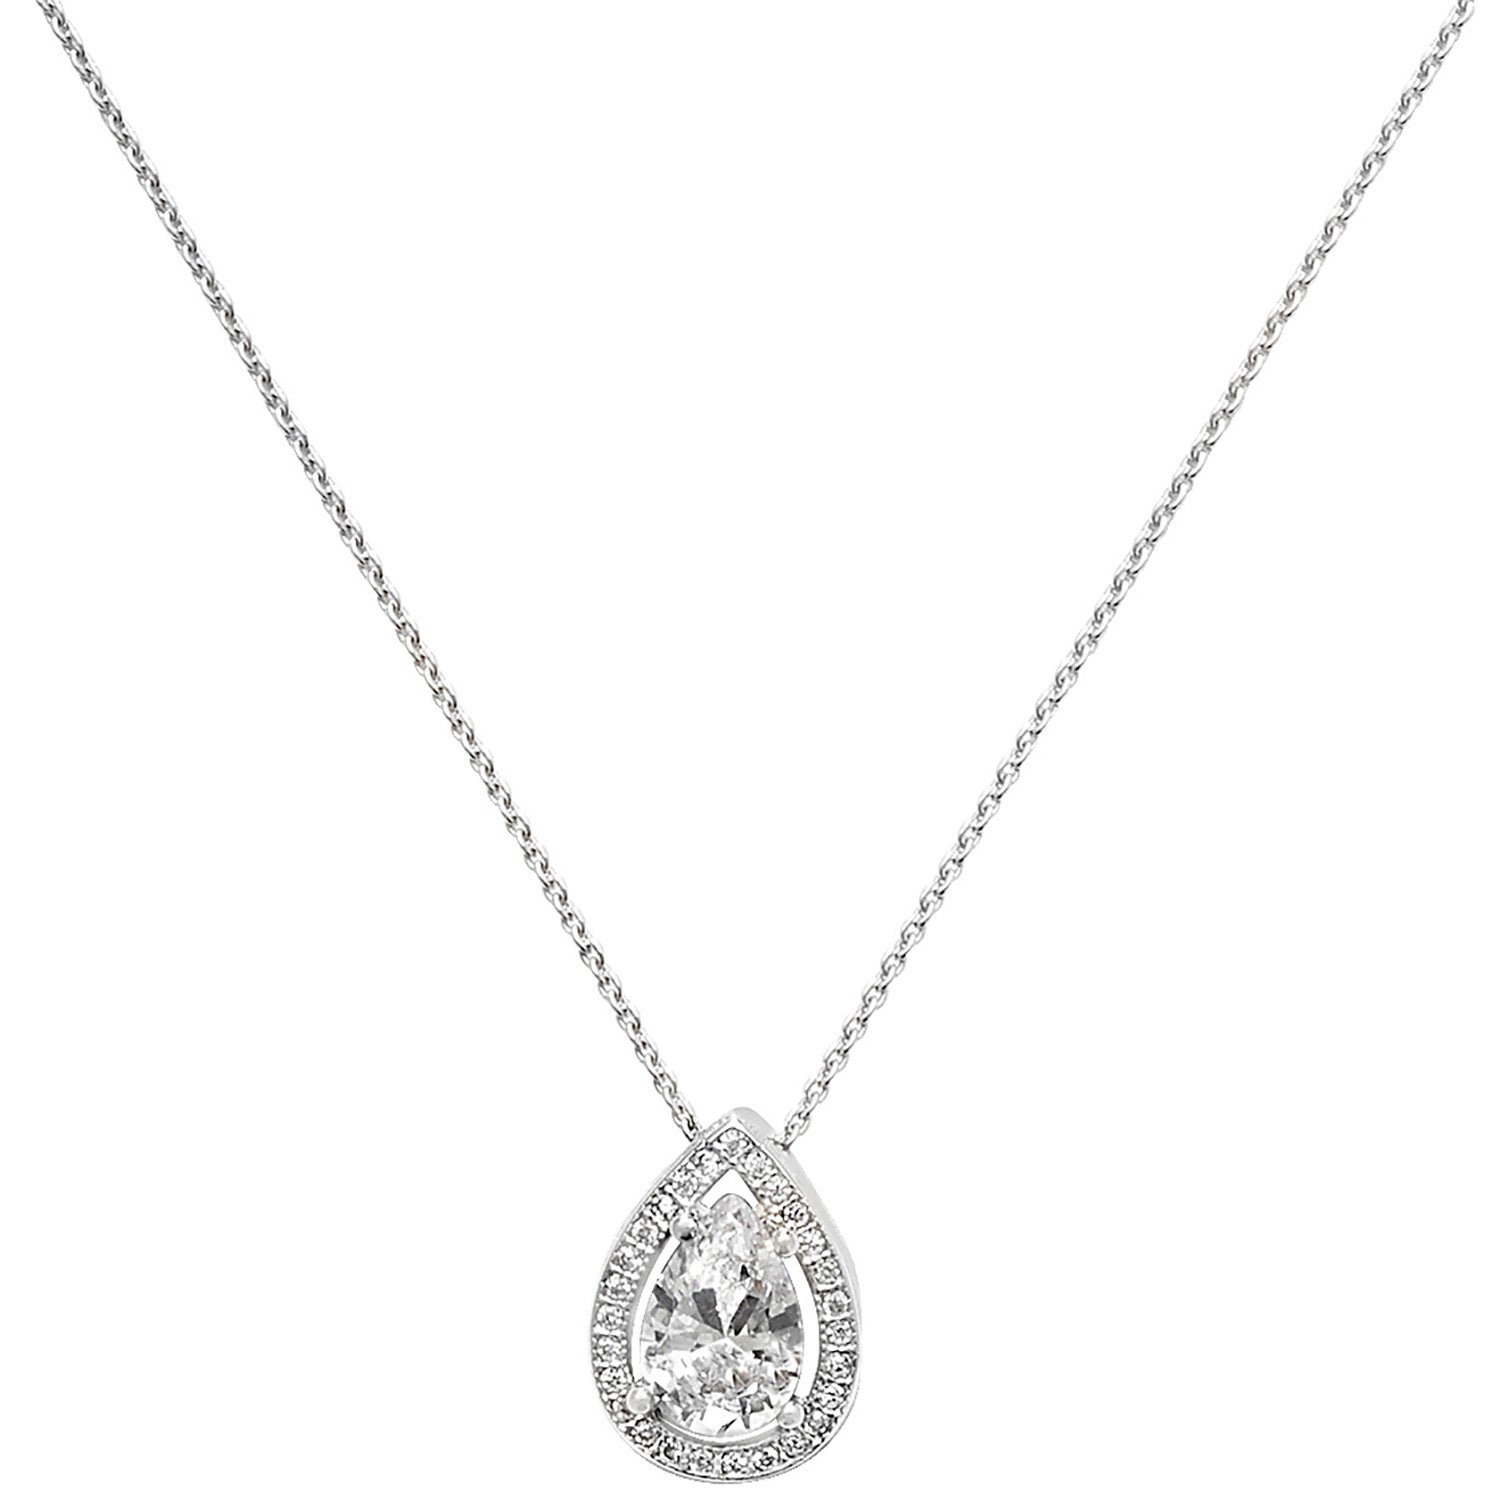 SILVER RHODIUM PLATED PEAR SHAPE HALO CZ NECKLET